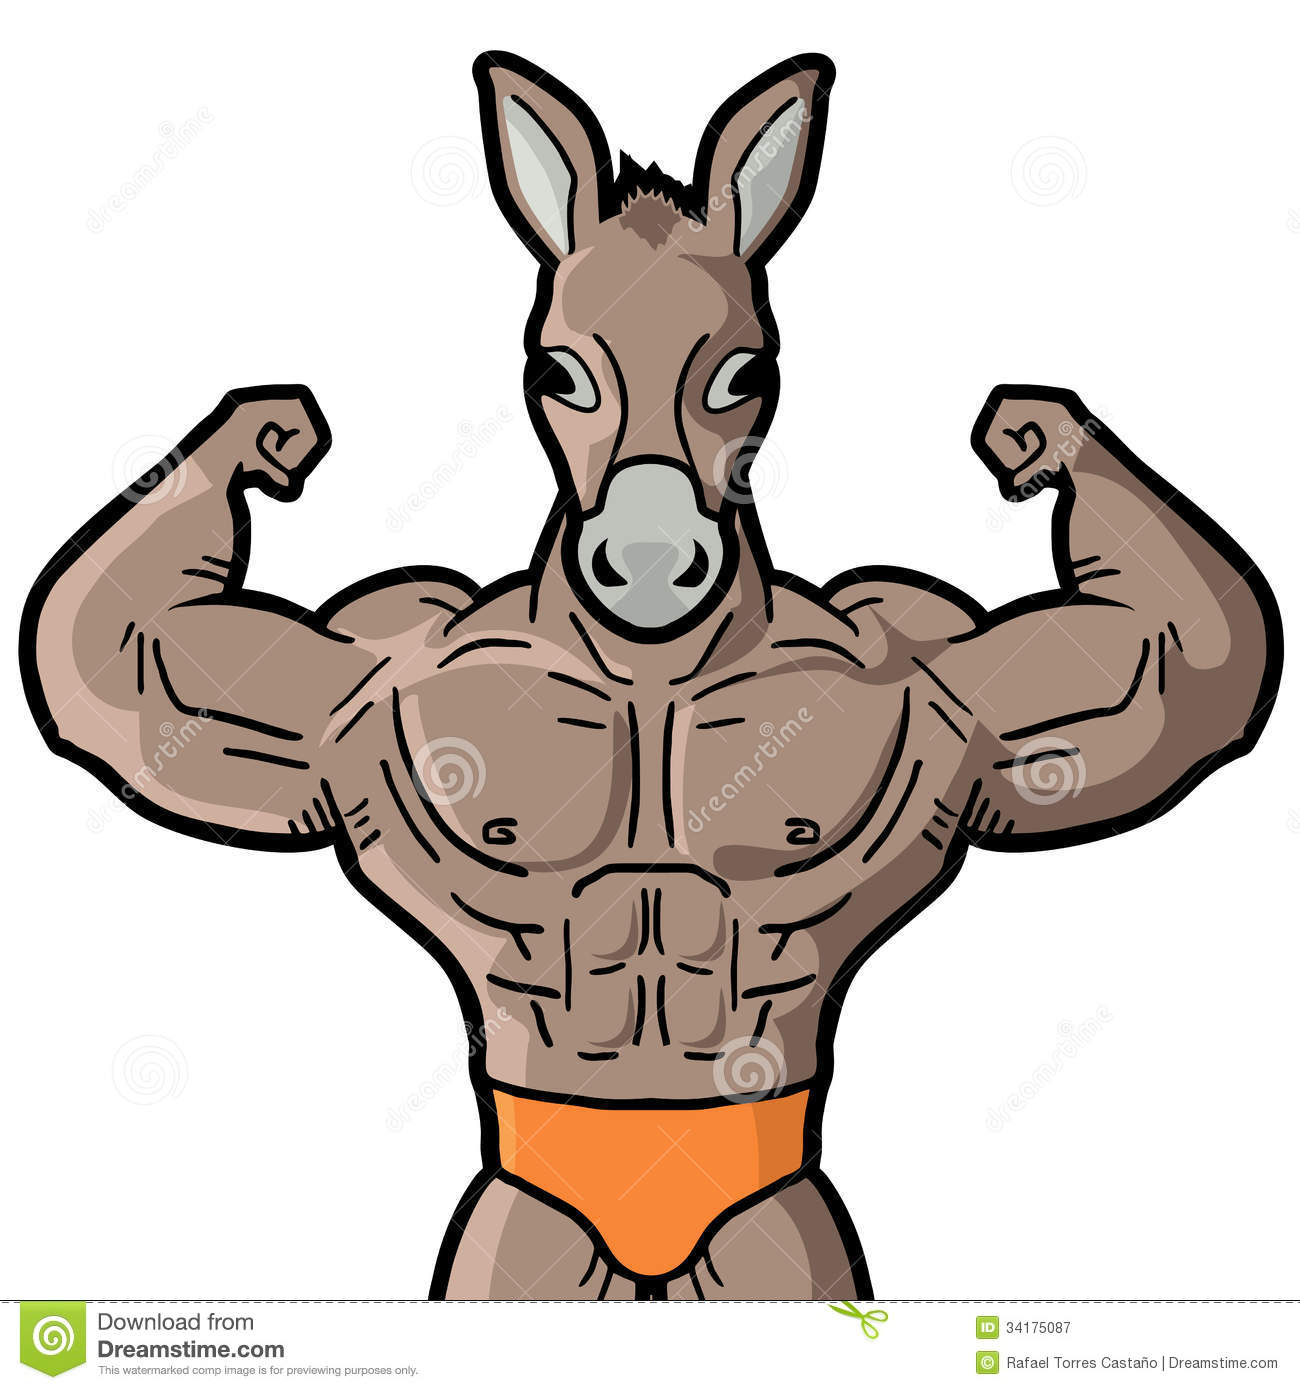 Muscle Horse Man Royalty Free Stock Photography   Image  34175087